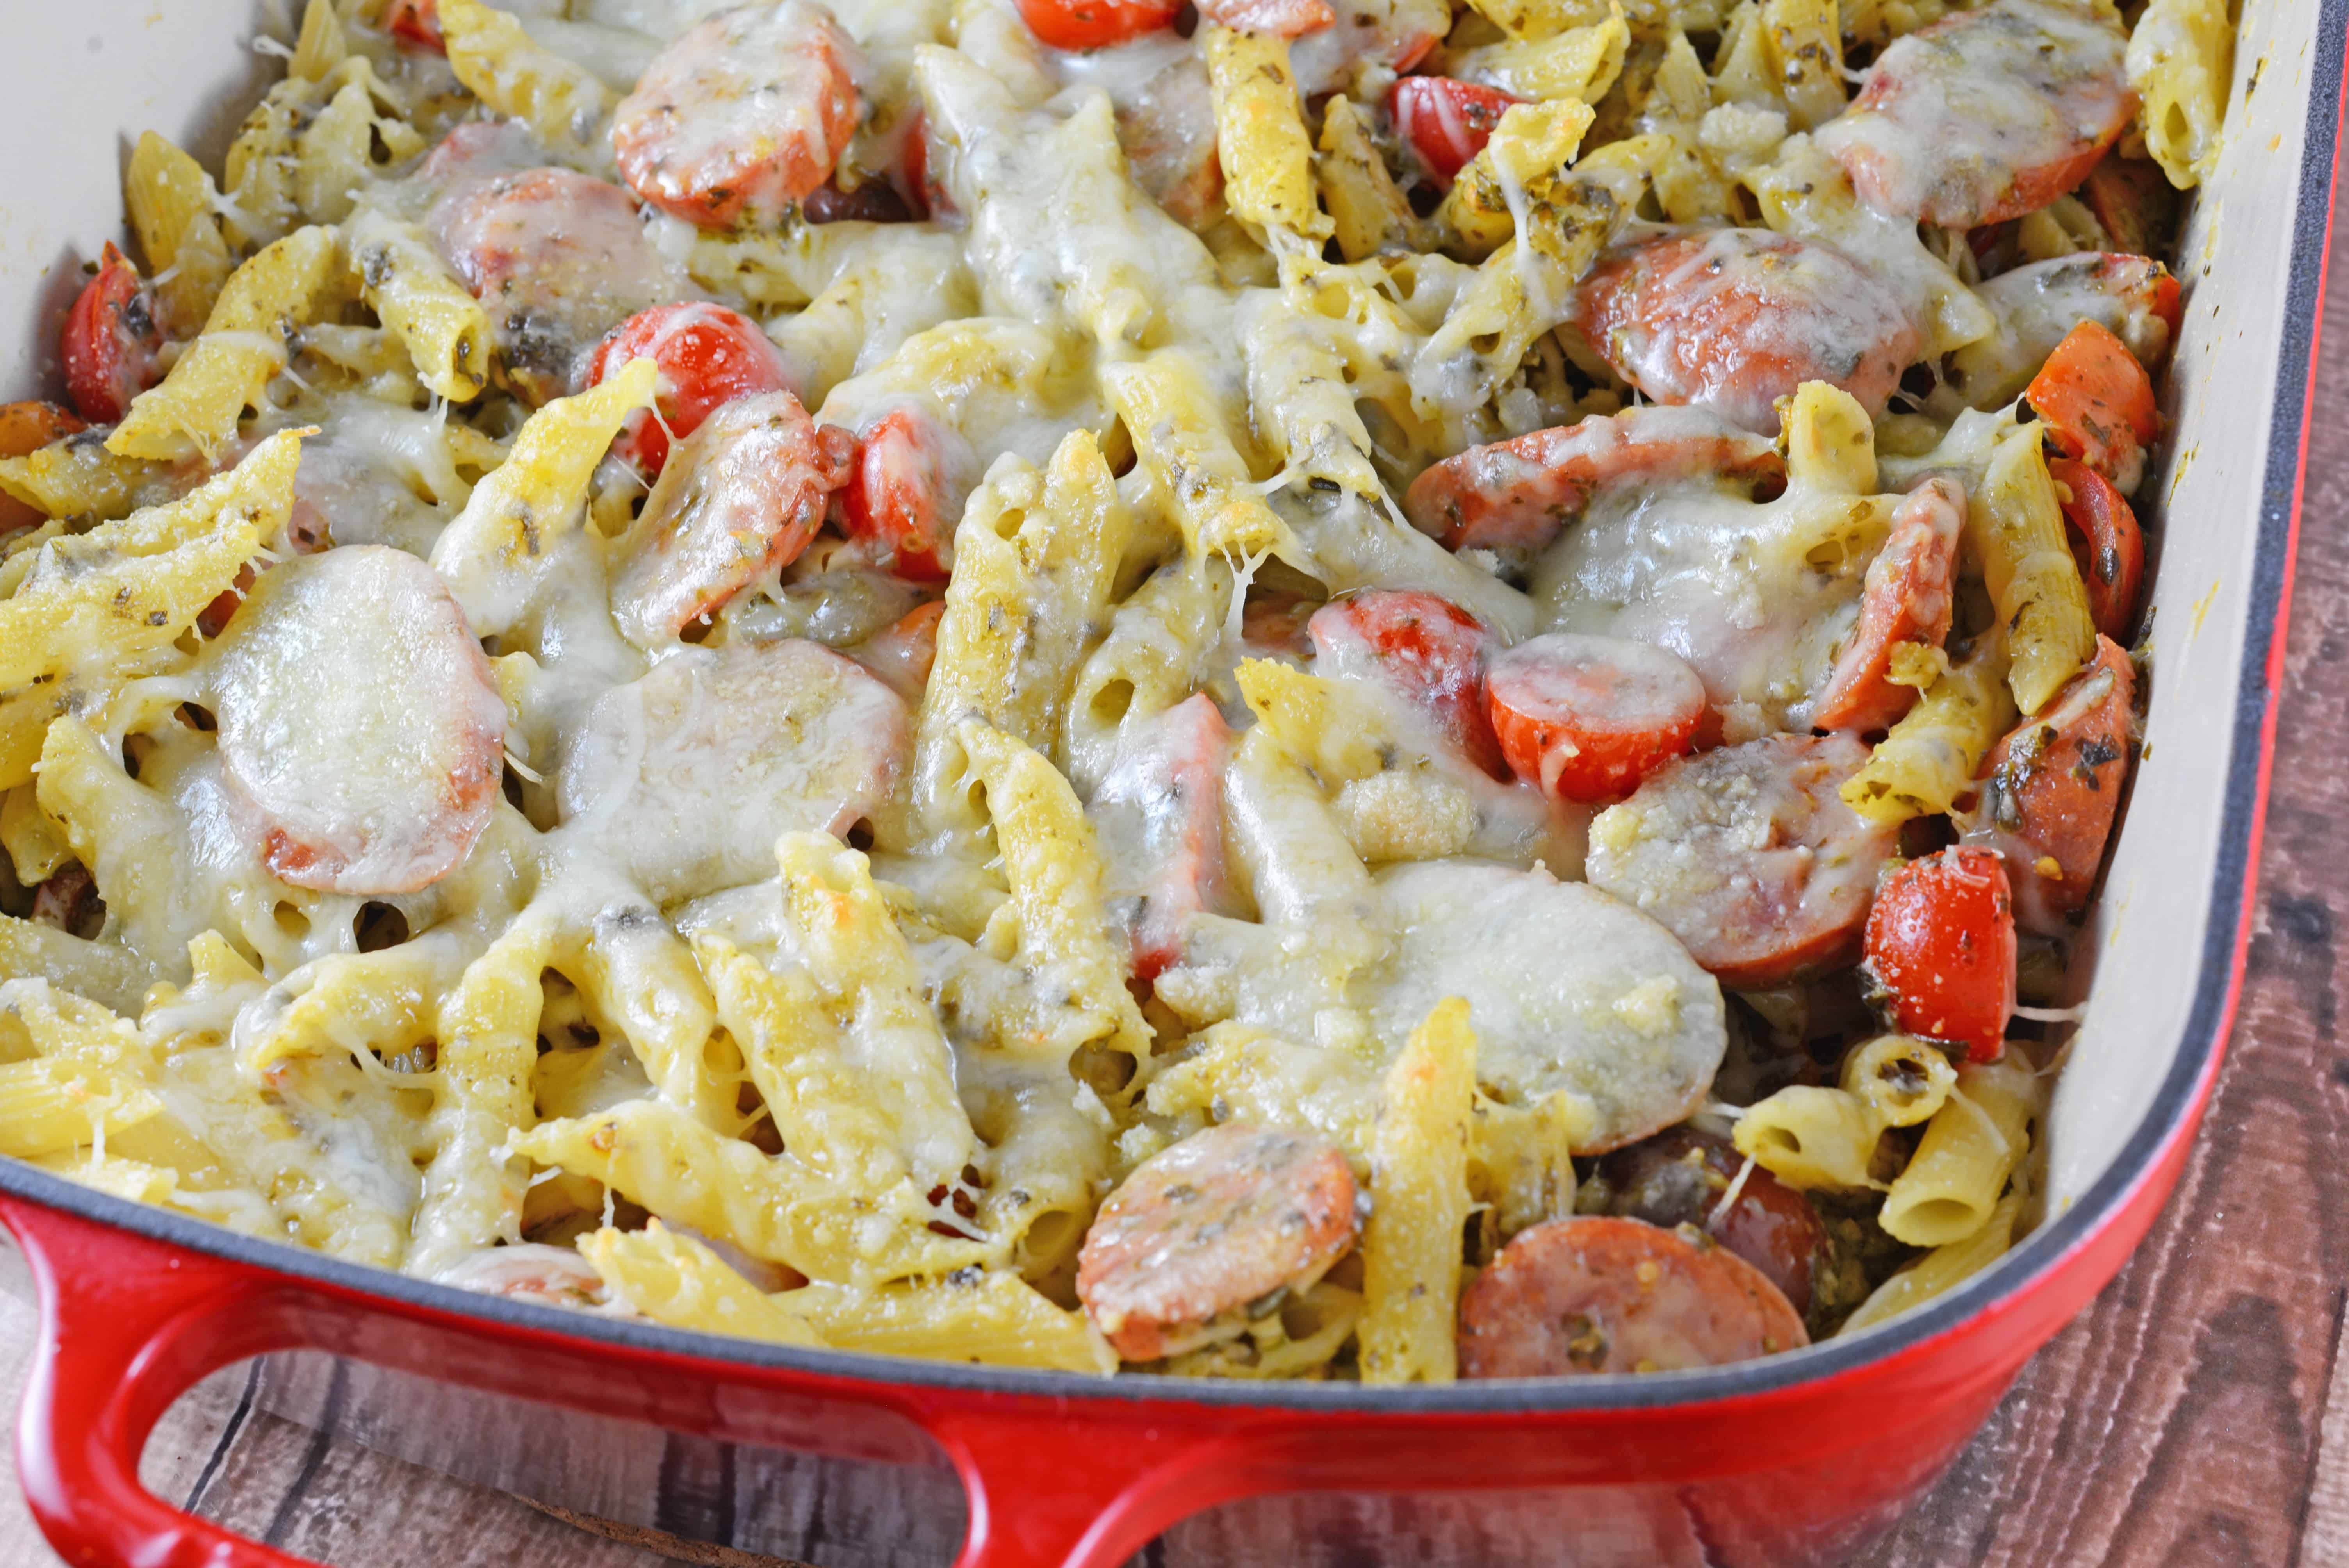 Pasta Bake is the perfect easy pasta dish for busy weeknights. Creamy pesto sauce, penne, smoked sausage and Italian cheese make this the perfect meal.